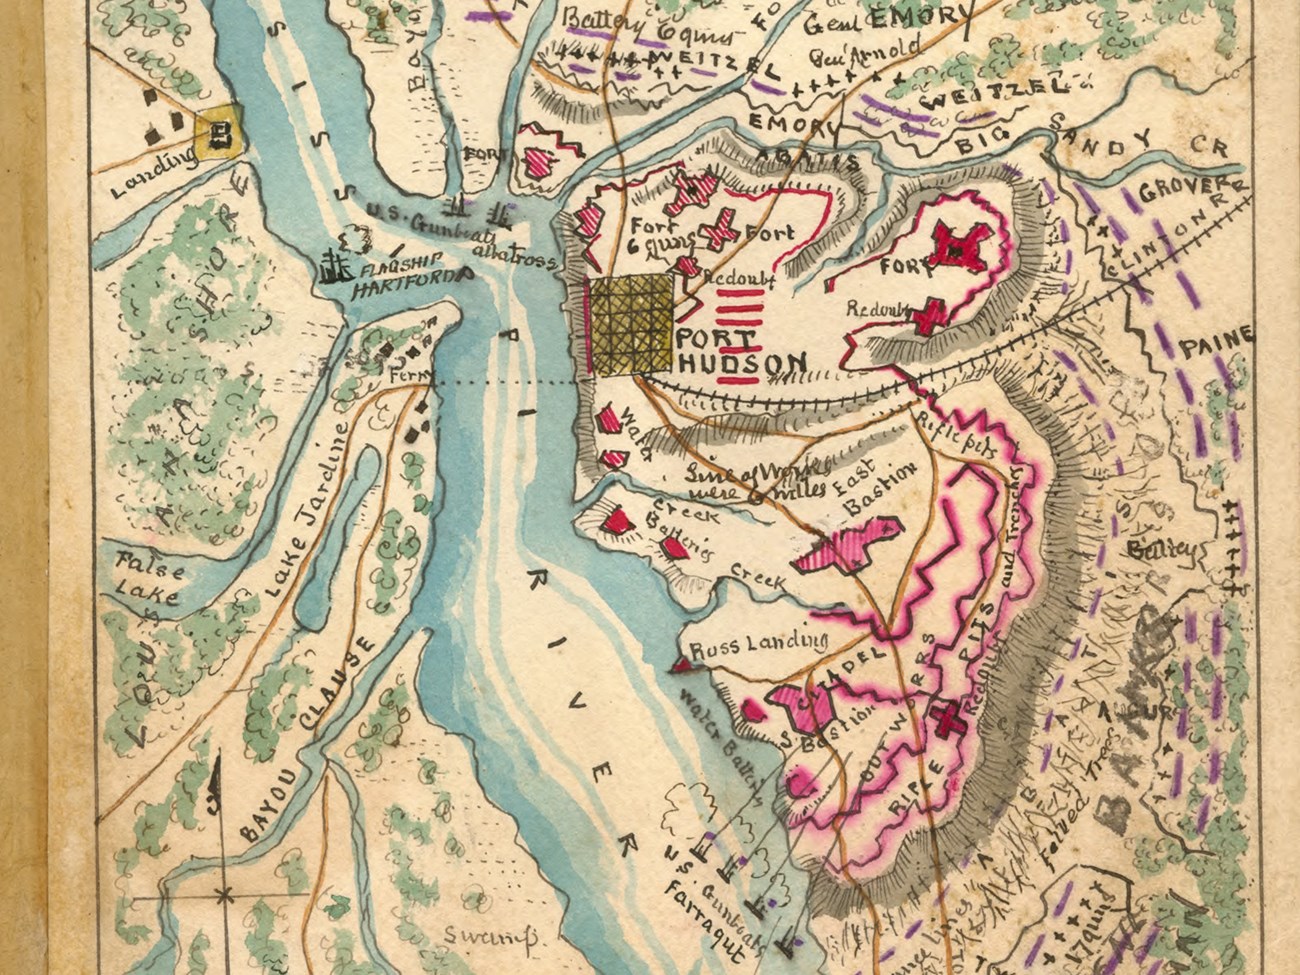 hand-drawn map of battle engagement at fort on river, lines denoting each side's movement draw in pink and purple